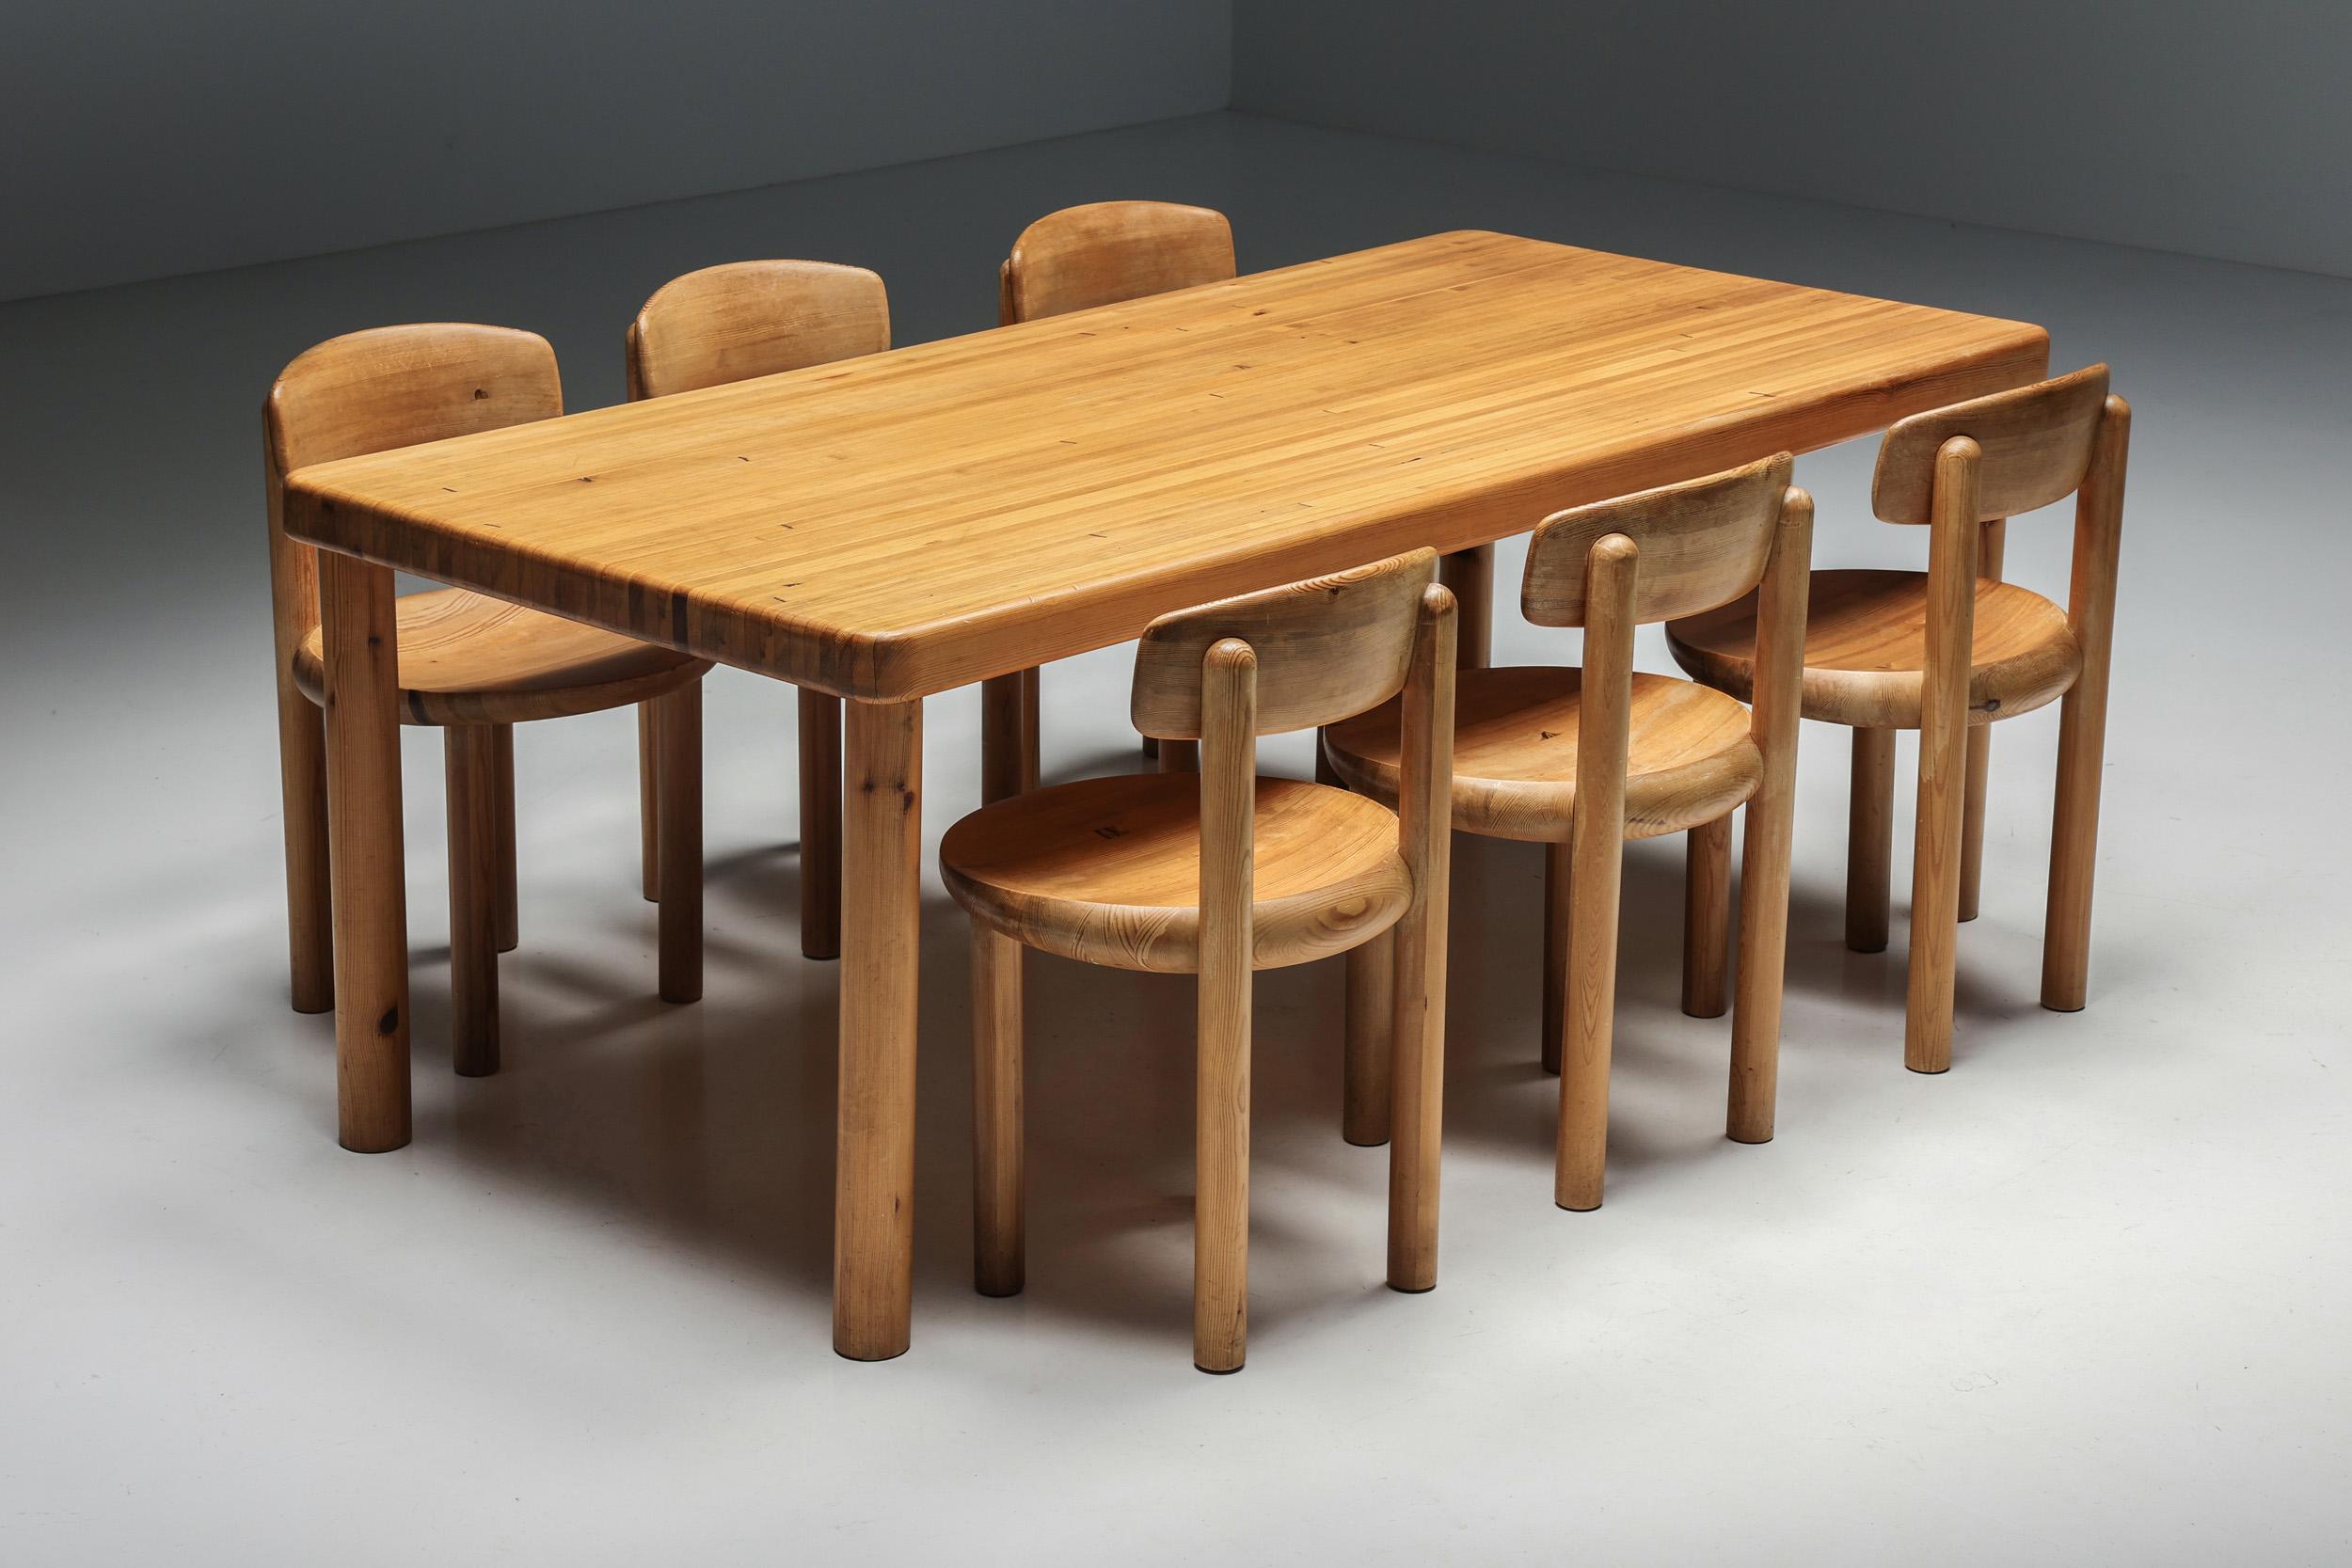 Rainer Daumiller; Pine dining table; Hirtshals Savværk; Denmark; Danish Design; 1970s

Mid-century dining table by the Danish architect Rainer Daumiller, produced in Denmark by Hirtshals Savværk during the 1970s. This table, made of solid pine, is